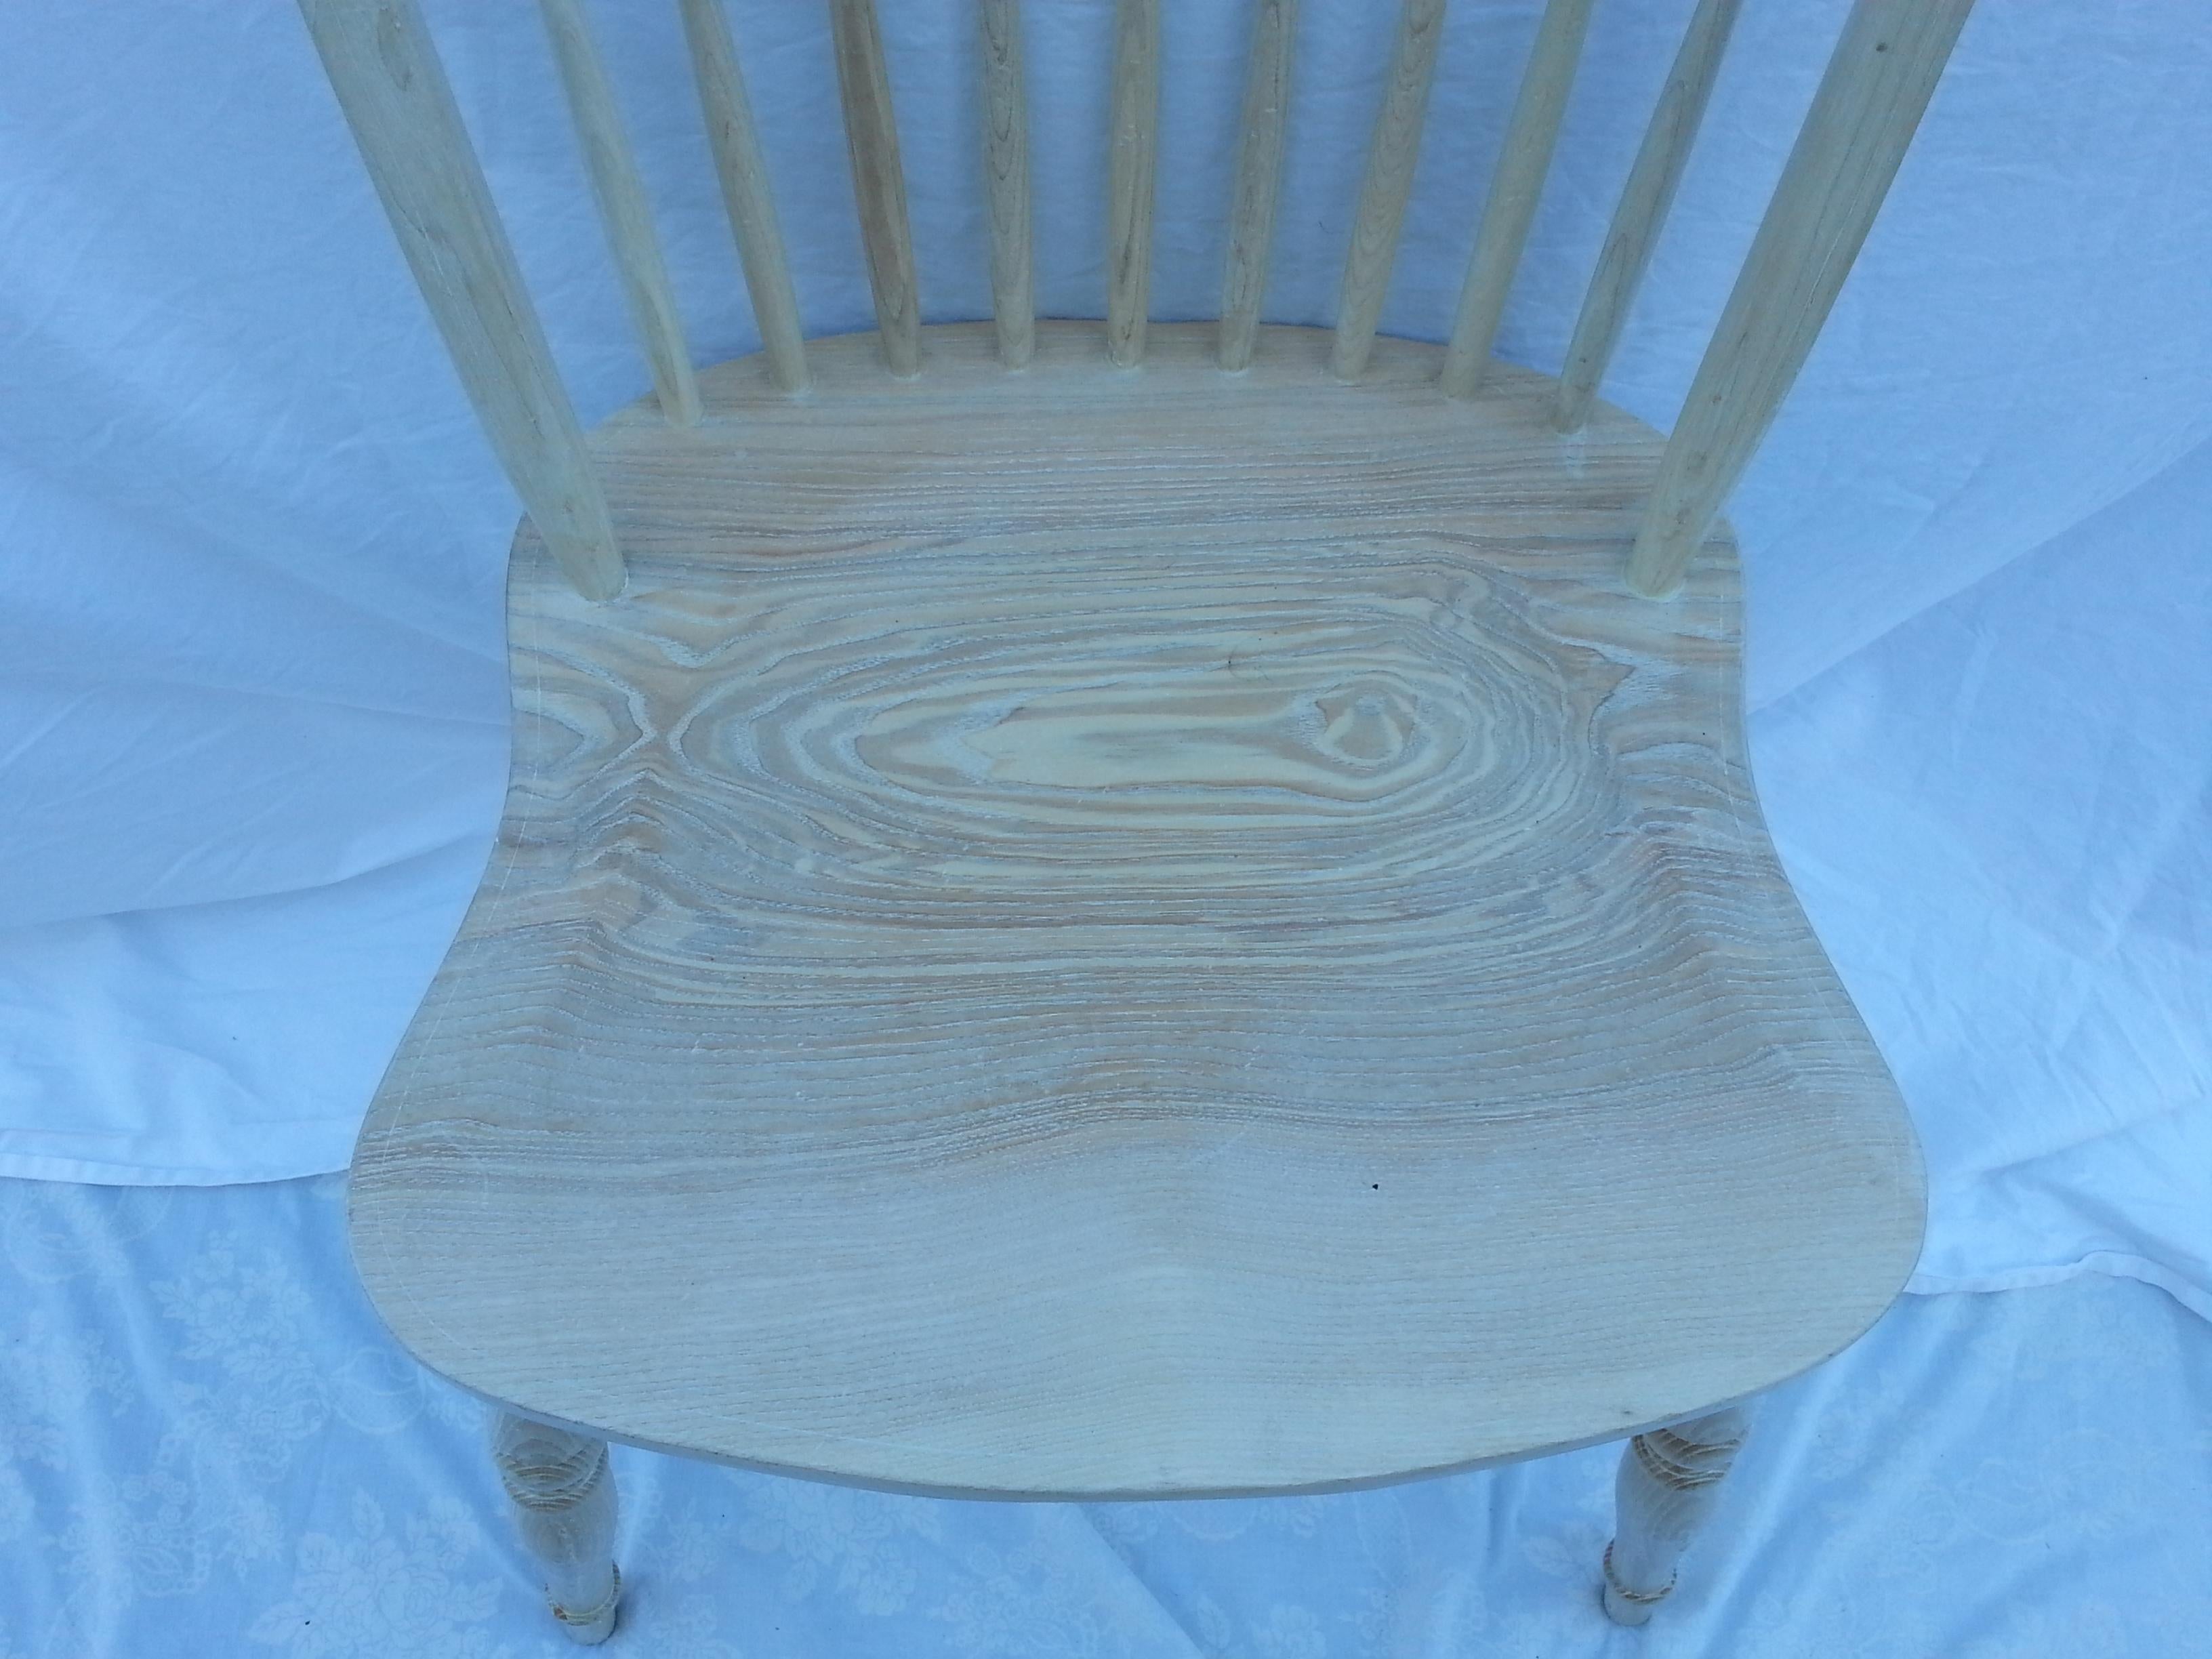 reproduction chair